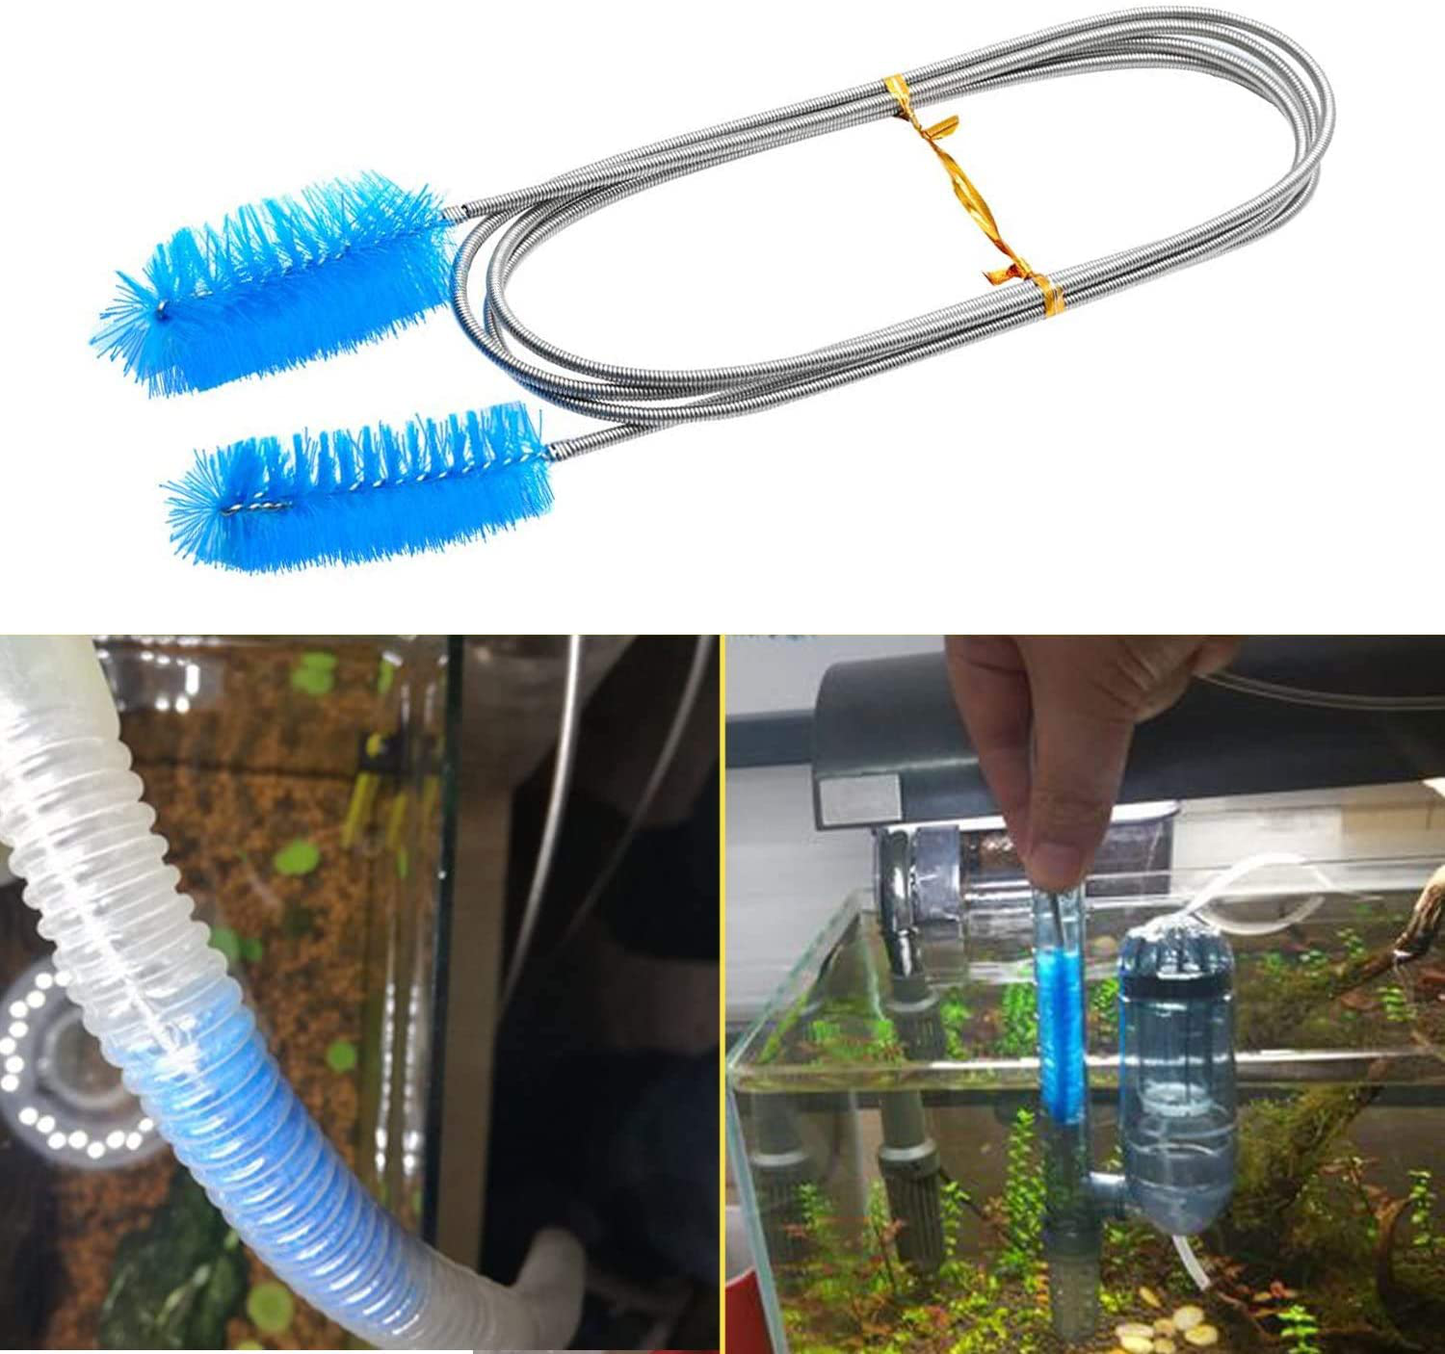 WEITY 2 Pack Aquarium Cleaning Brushes, 61-Inch Stainless Steel Springs, Flexible Drain Brush Double Ended Hose Pipe and 2 Straw Cleaning Brushes, Used for Fish Tank Household Kitchen Washing Tools Animals & Pet Supplies > Pet Supplies > Fish Supplies > Aquarium Cleaning Supplies WEITY   